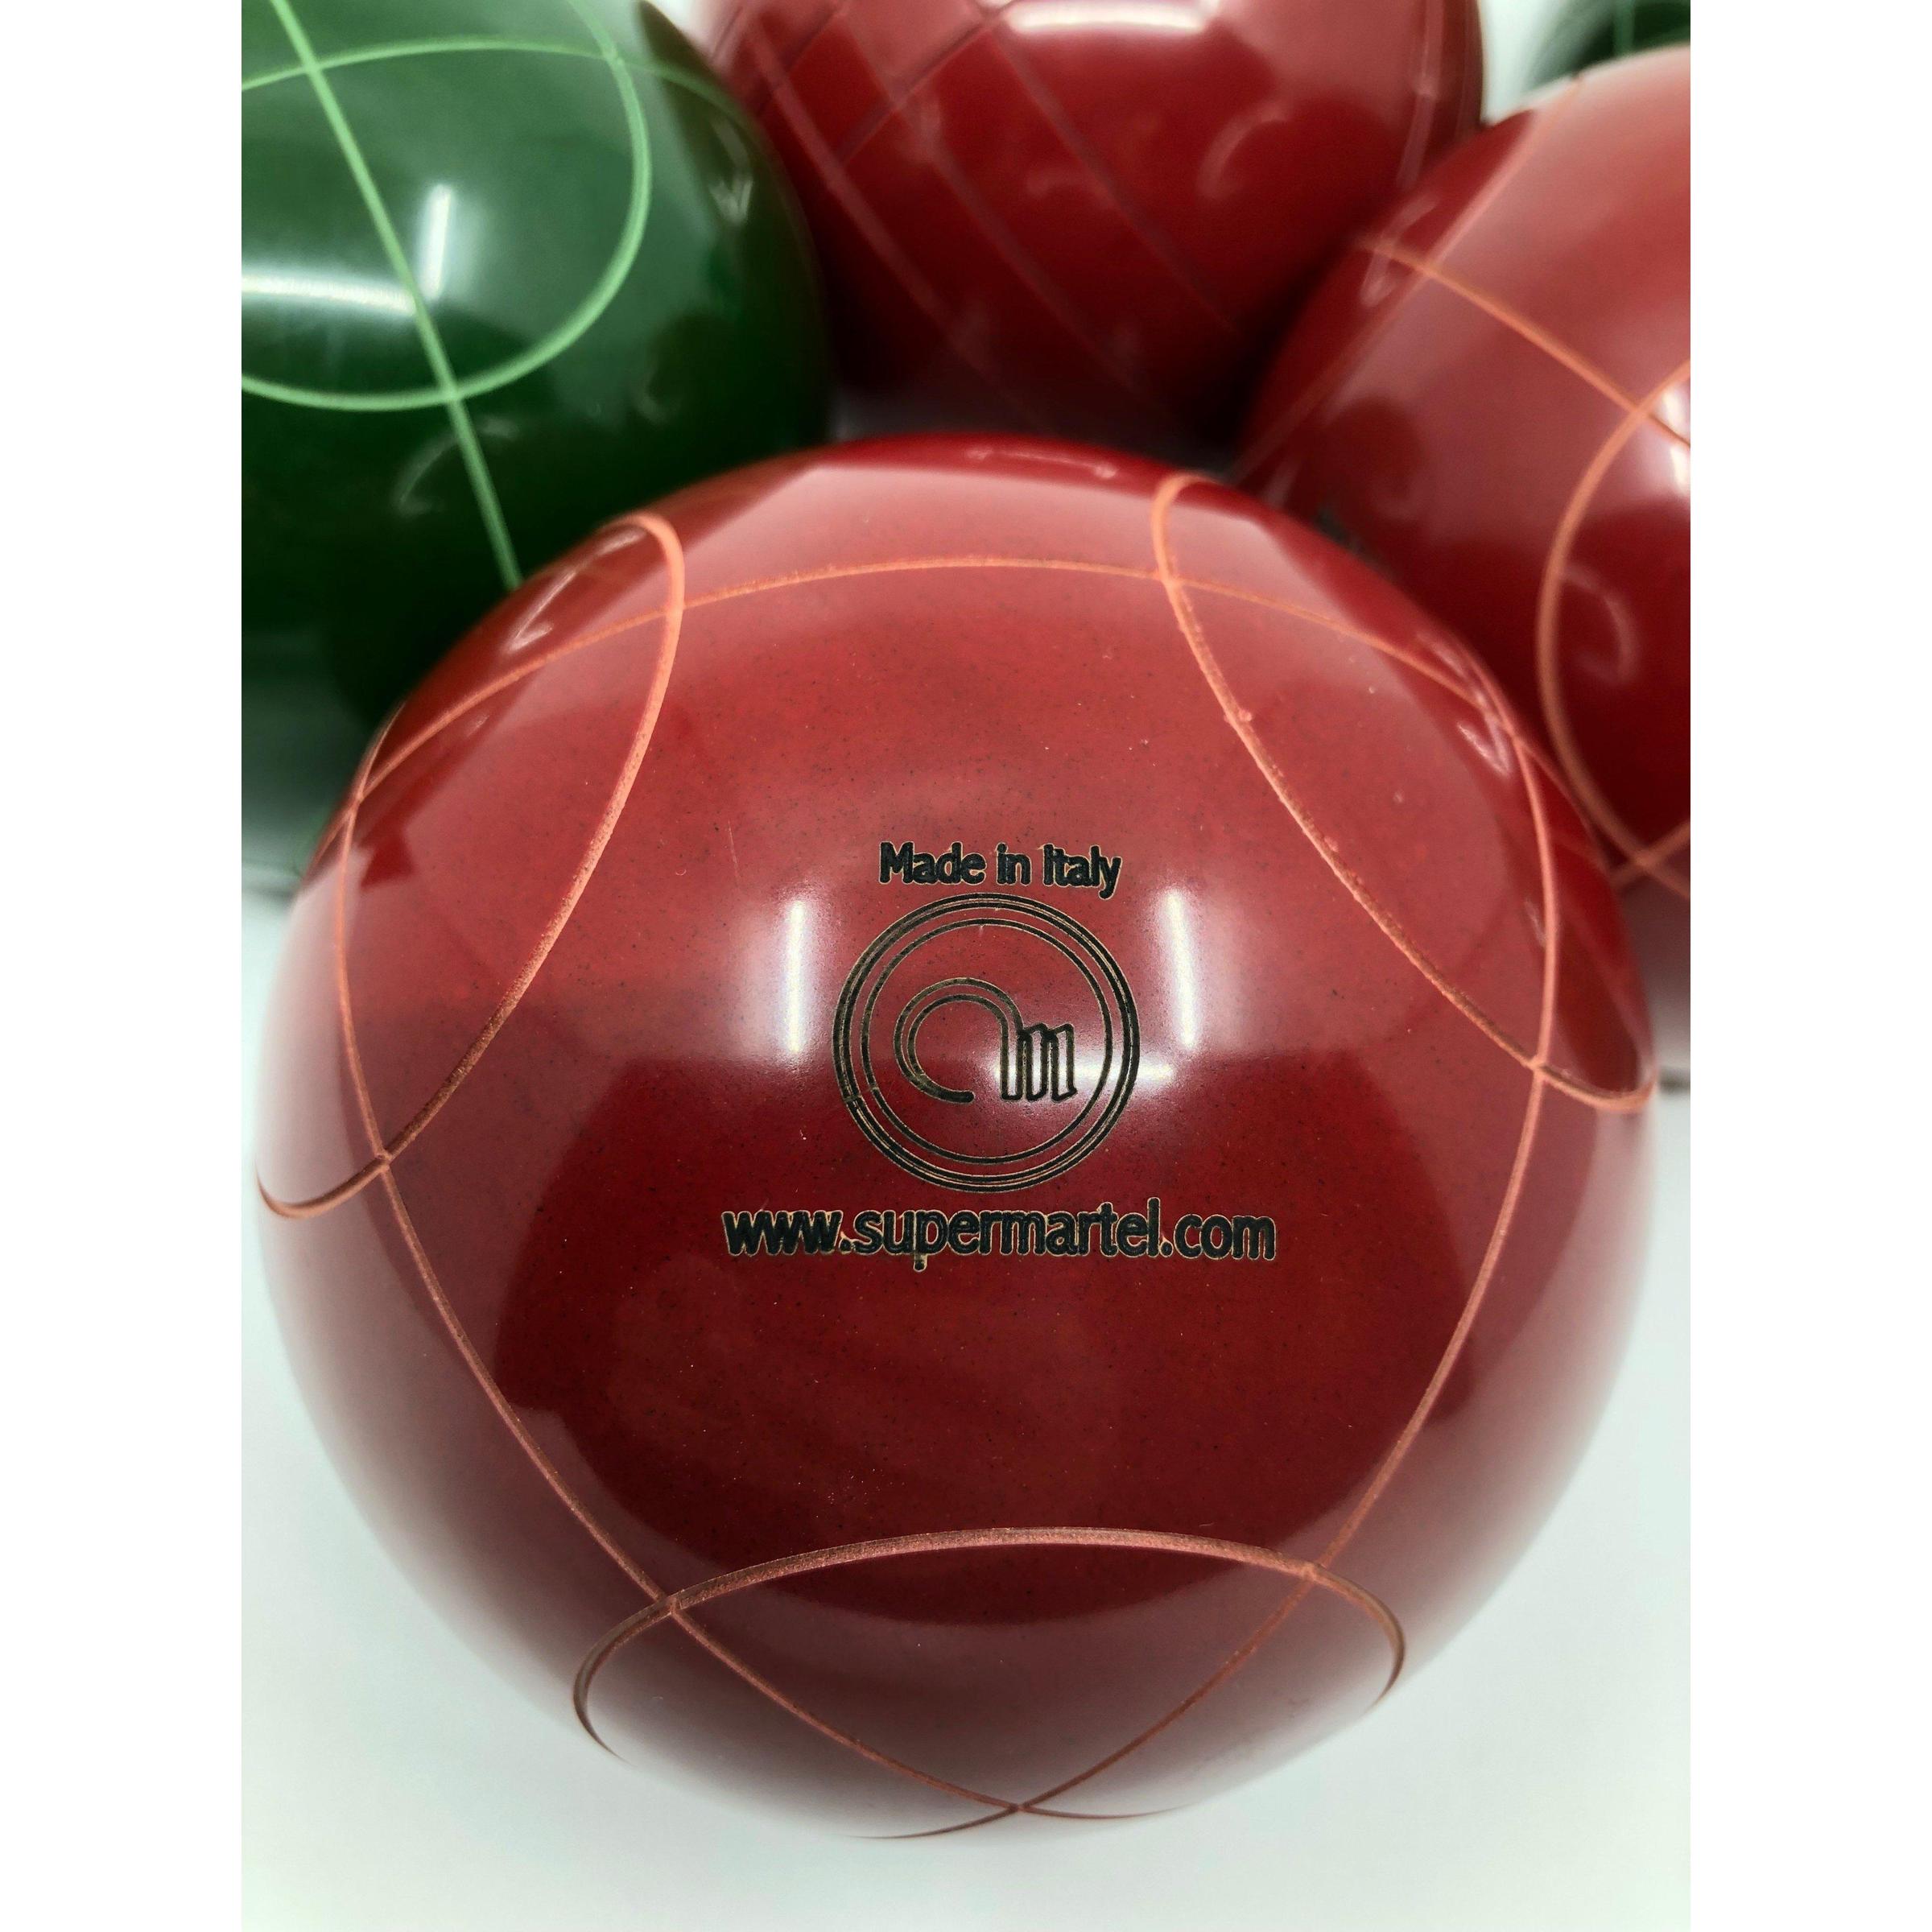 Made in Italy Super Martel Professional Bocce Ball Set 107mm, Tournament Rated Bocce Balls, Official Ball of World Champions, Includes Carrying Bag